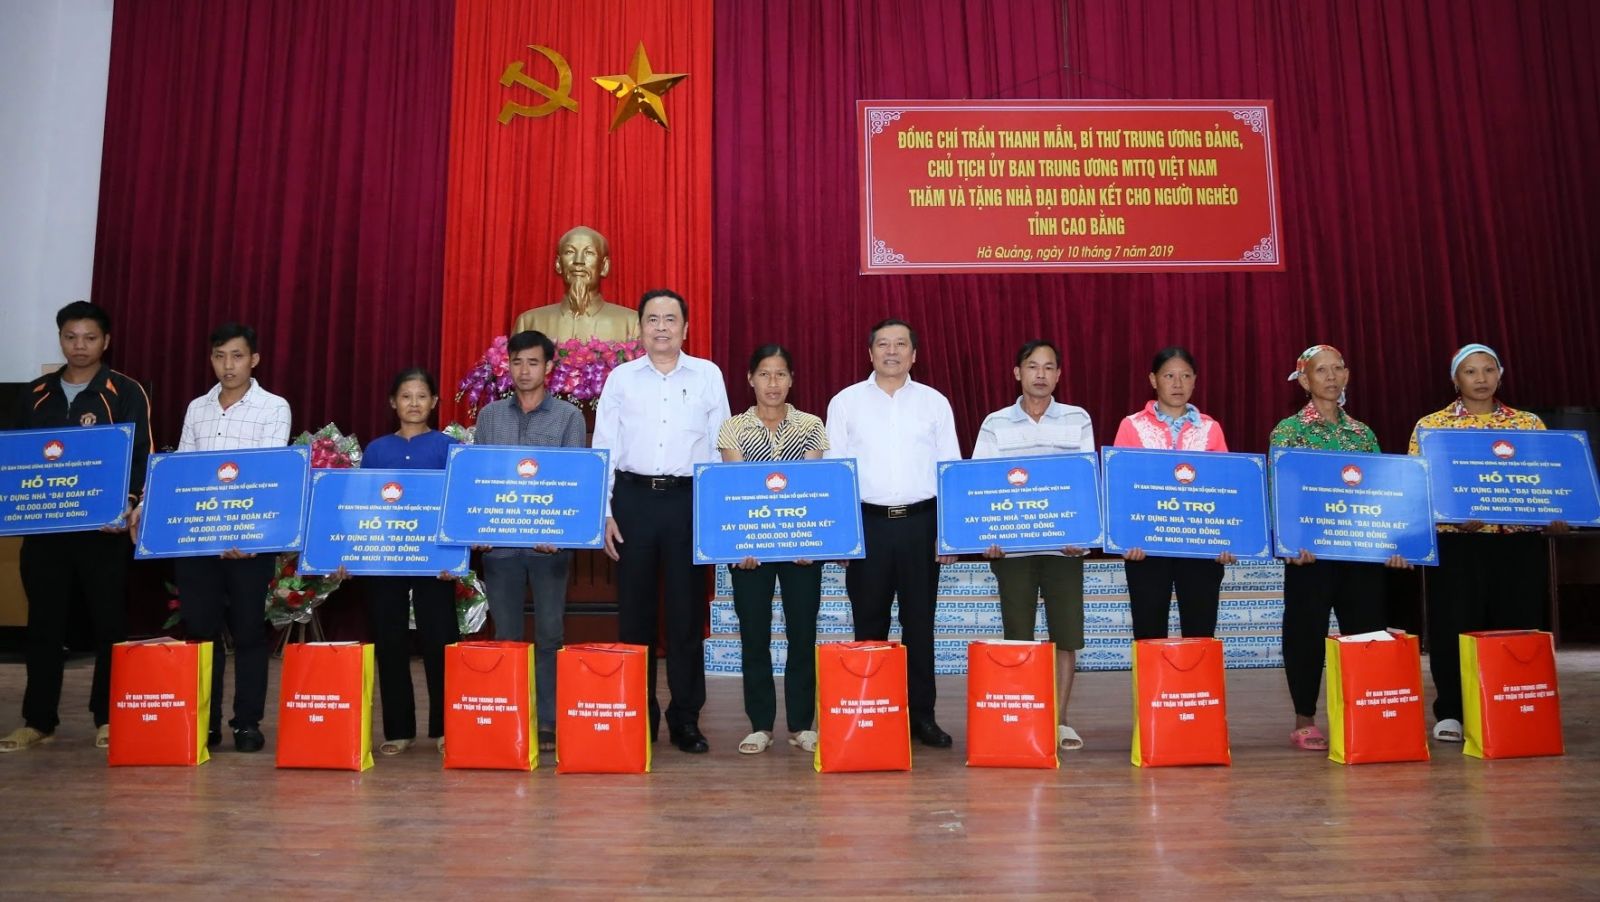 President of the Vietnam Fatherland Front Central Committee Tran Thanh Man presented houses to 10 needy and policy beneficiary households. (Photo: daidoanket.vn)